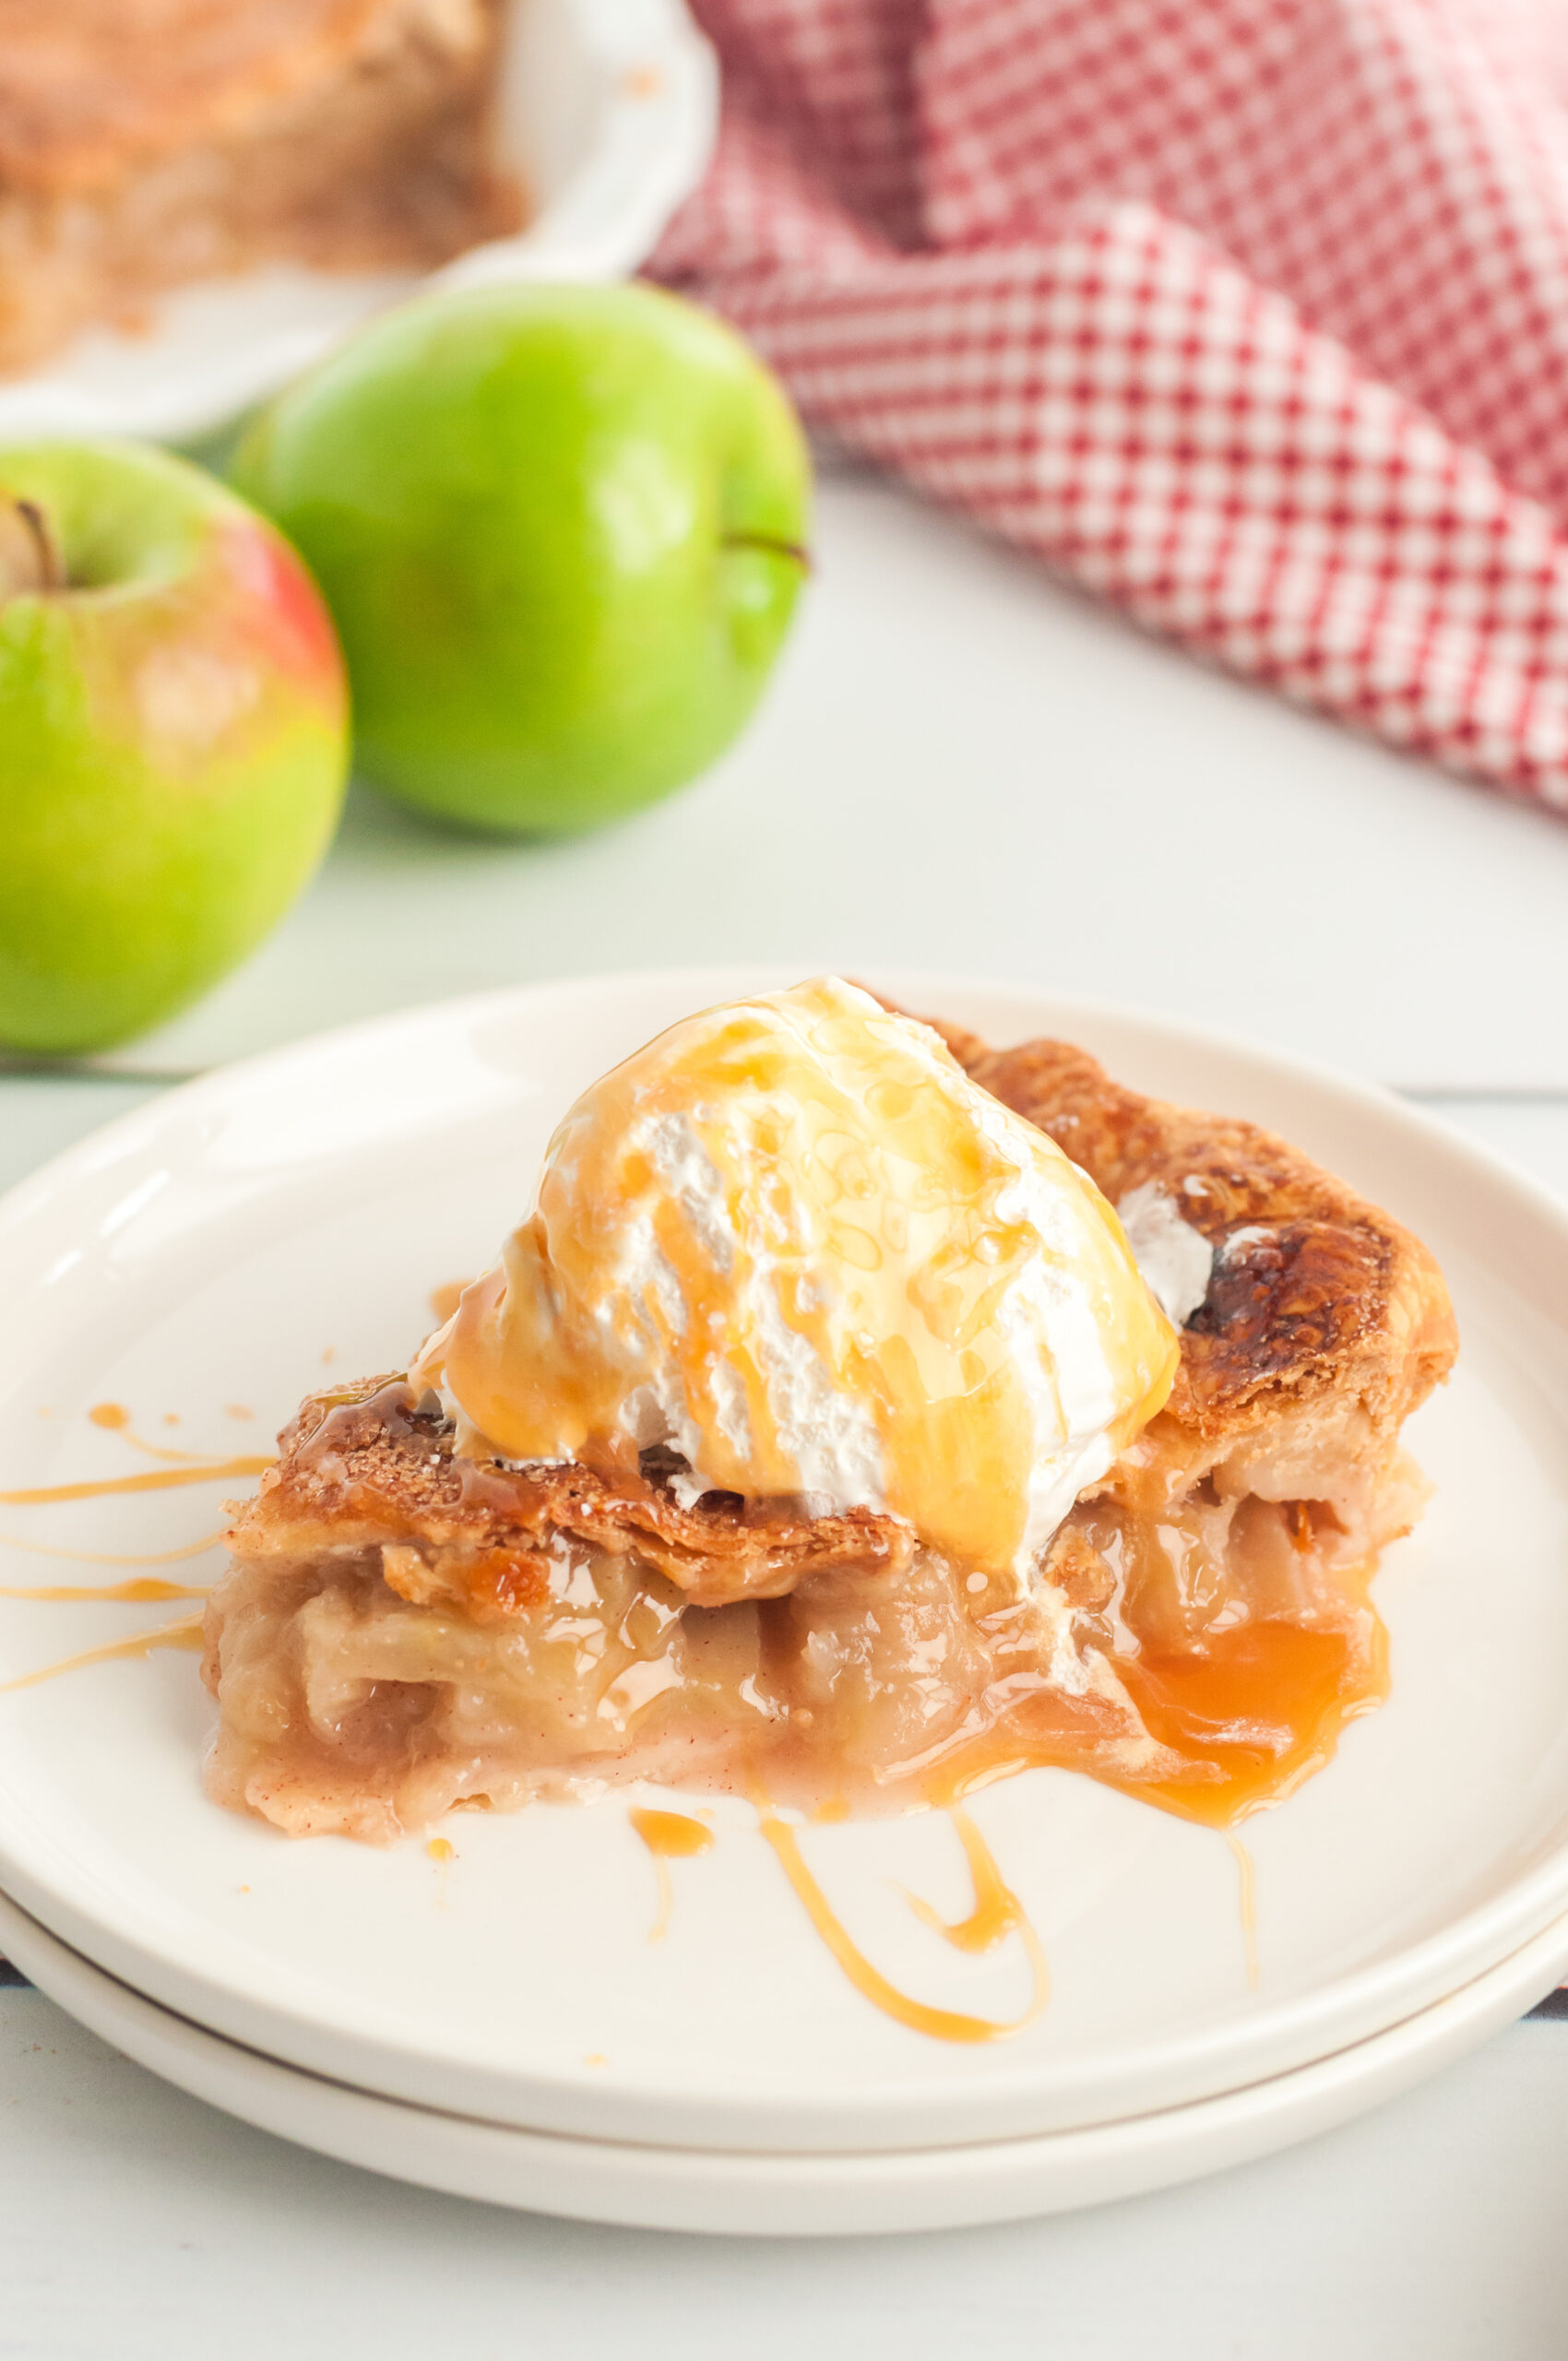 warm slice of apple pie being served with ice cream and caramel drizzle